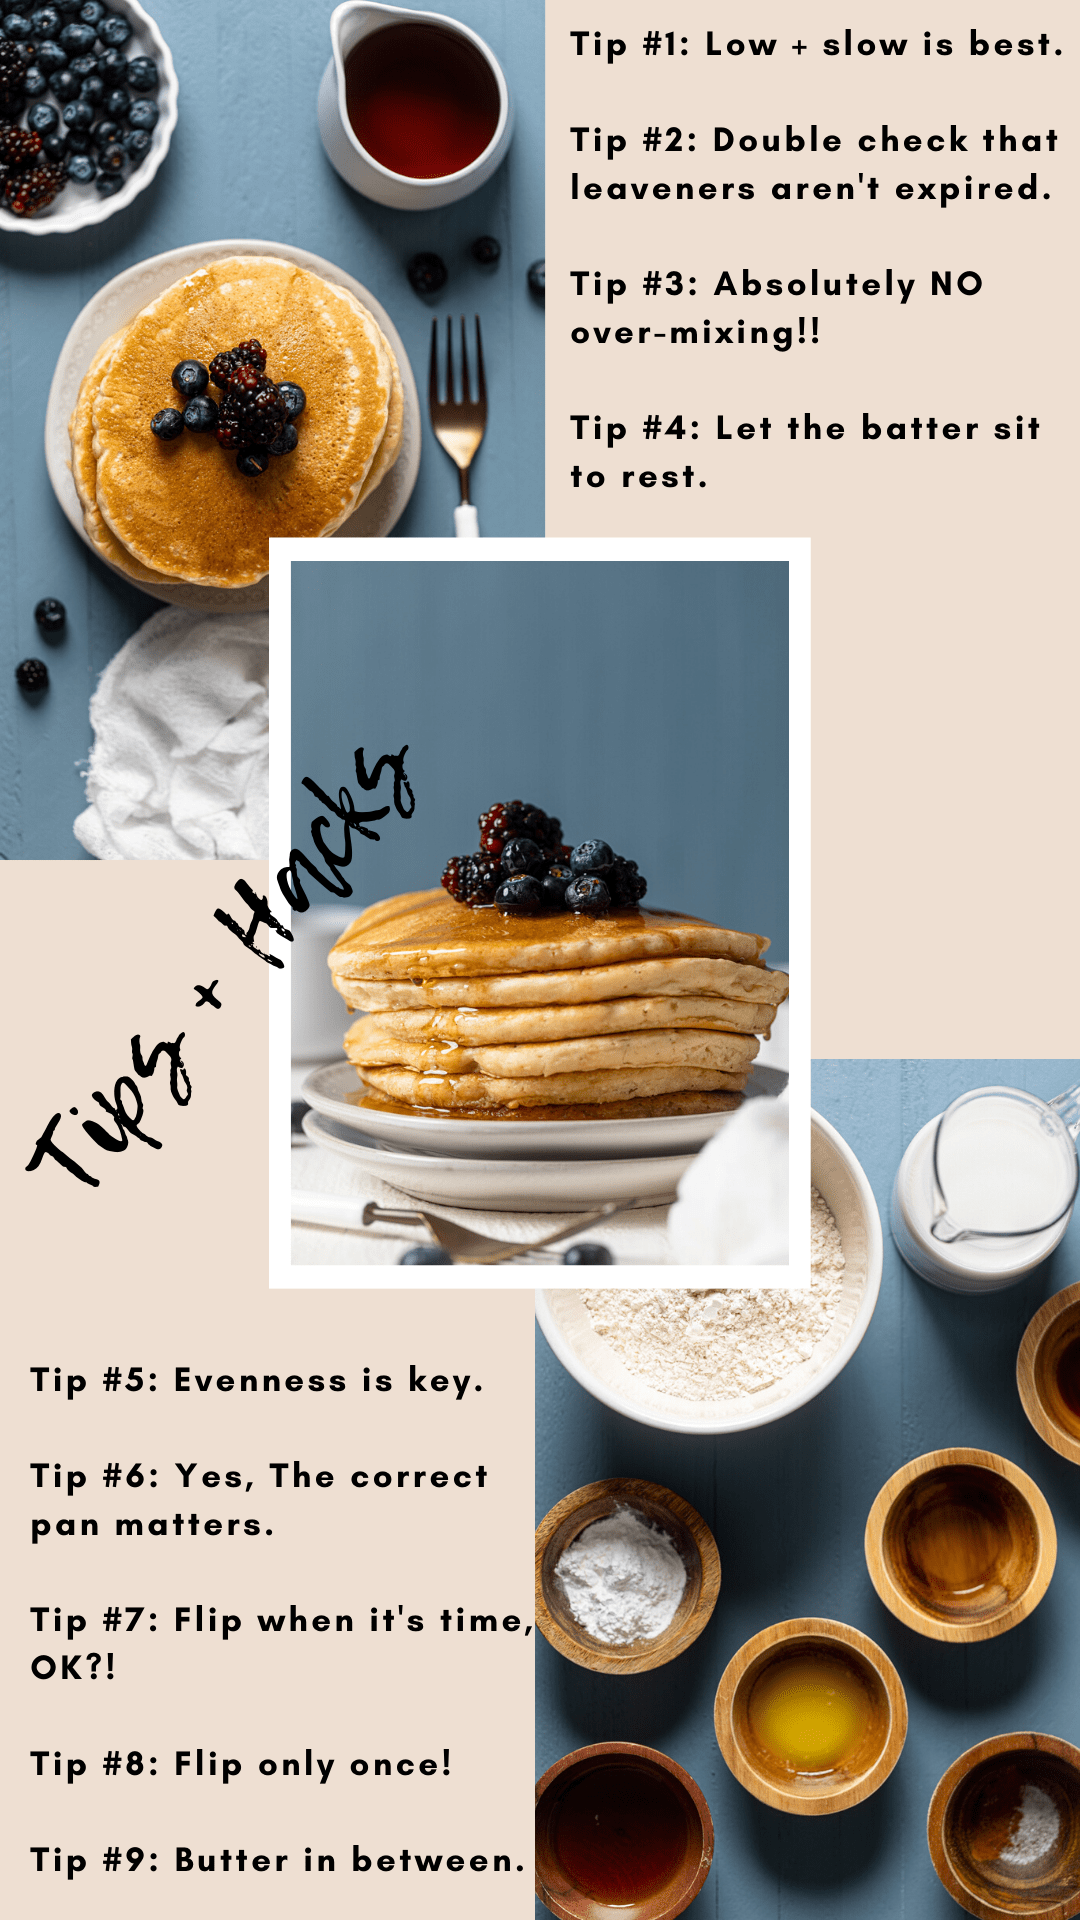 https://www.orchidsandsweettea.com/wp-content/uploads/2022/03/Pancake-Tips.png